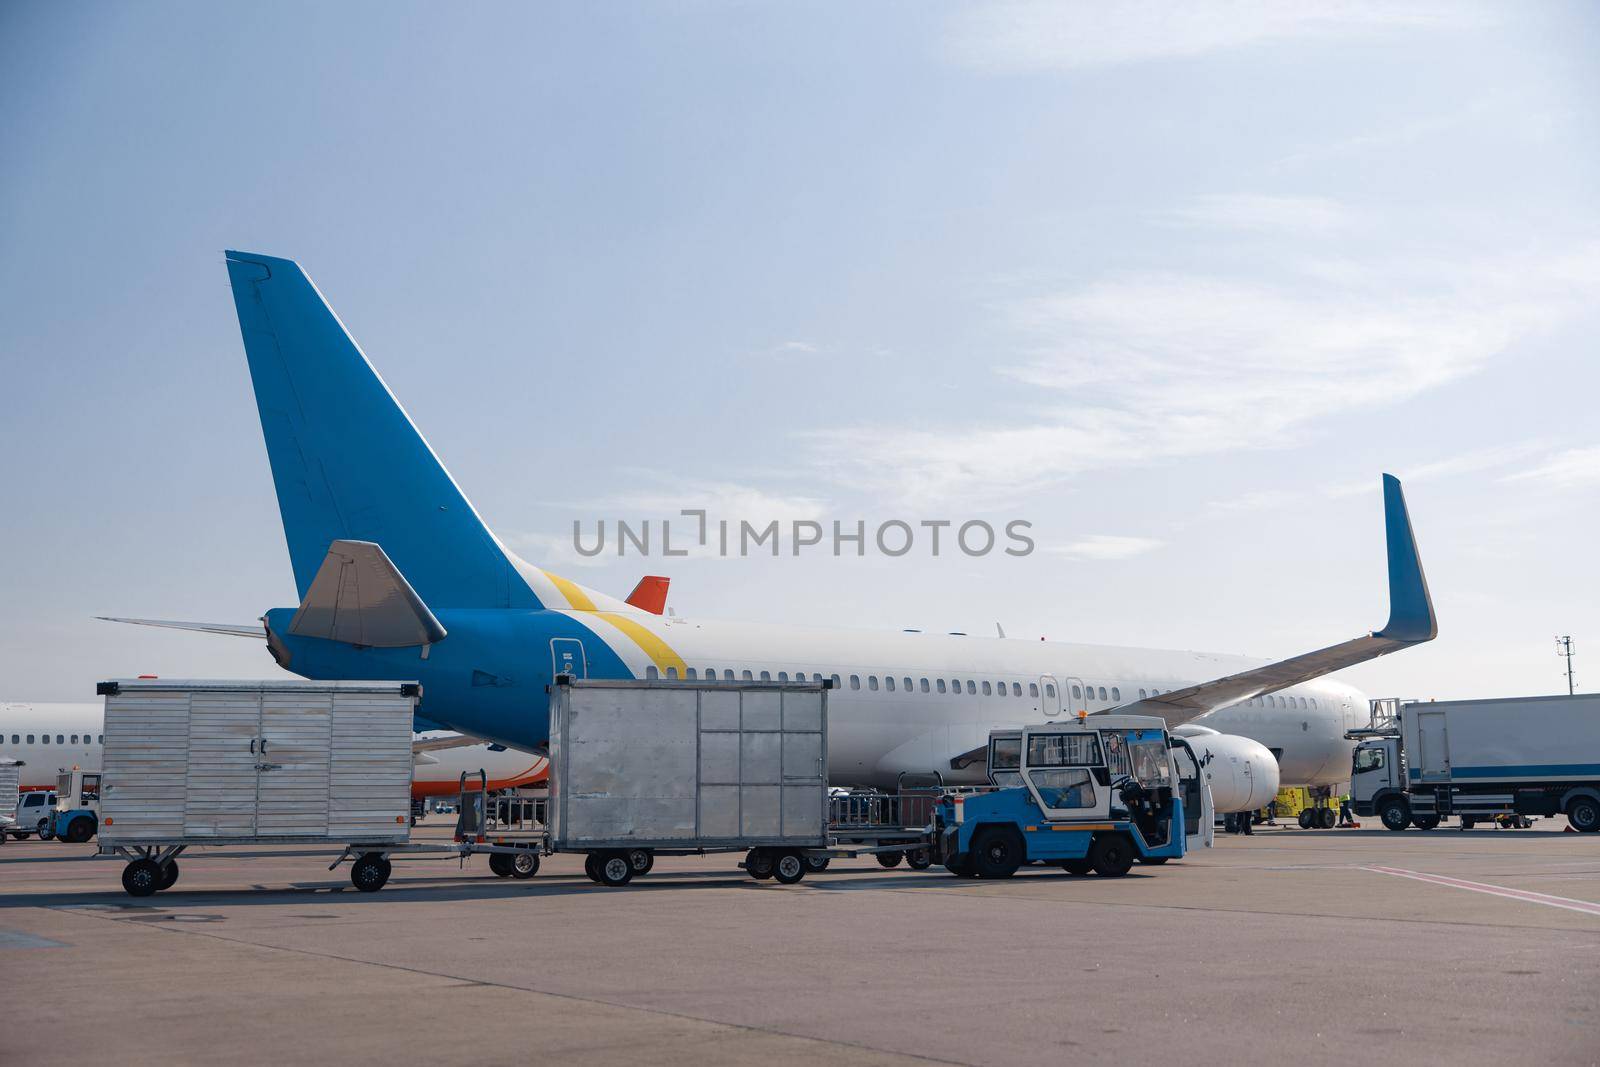 Airfield tractors near big modern airplane ready for boarding in airport hub on a daytime by Yaroslav_astakhov